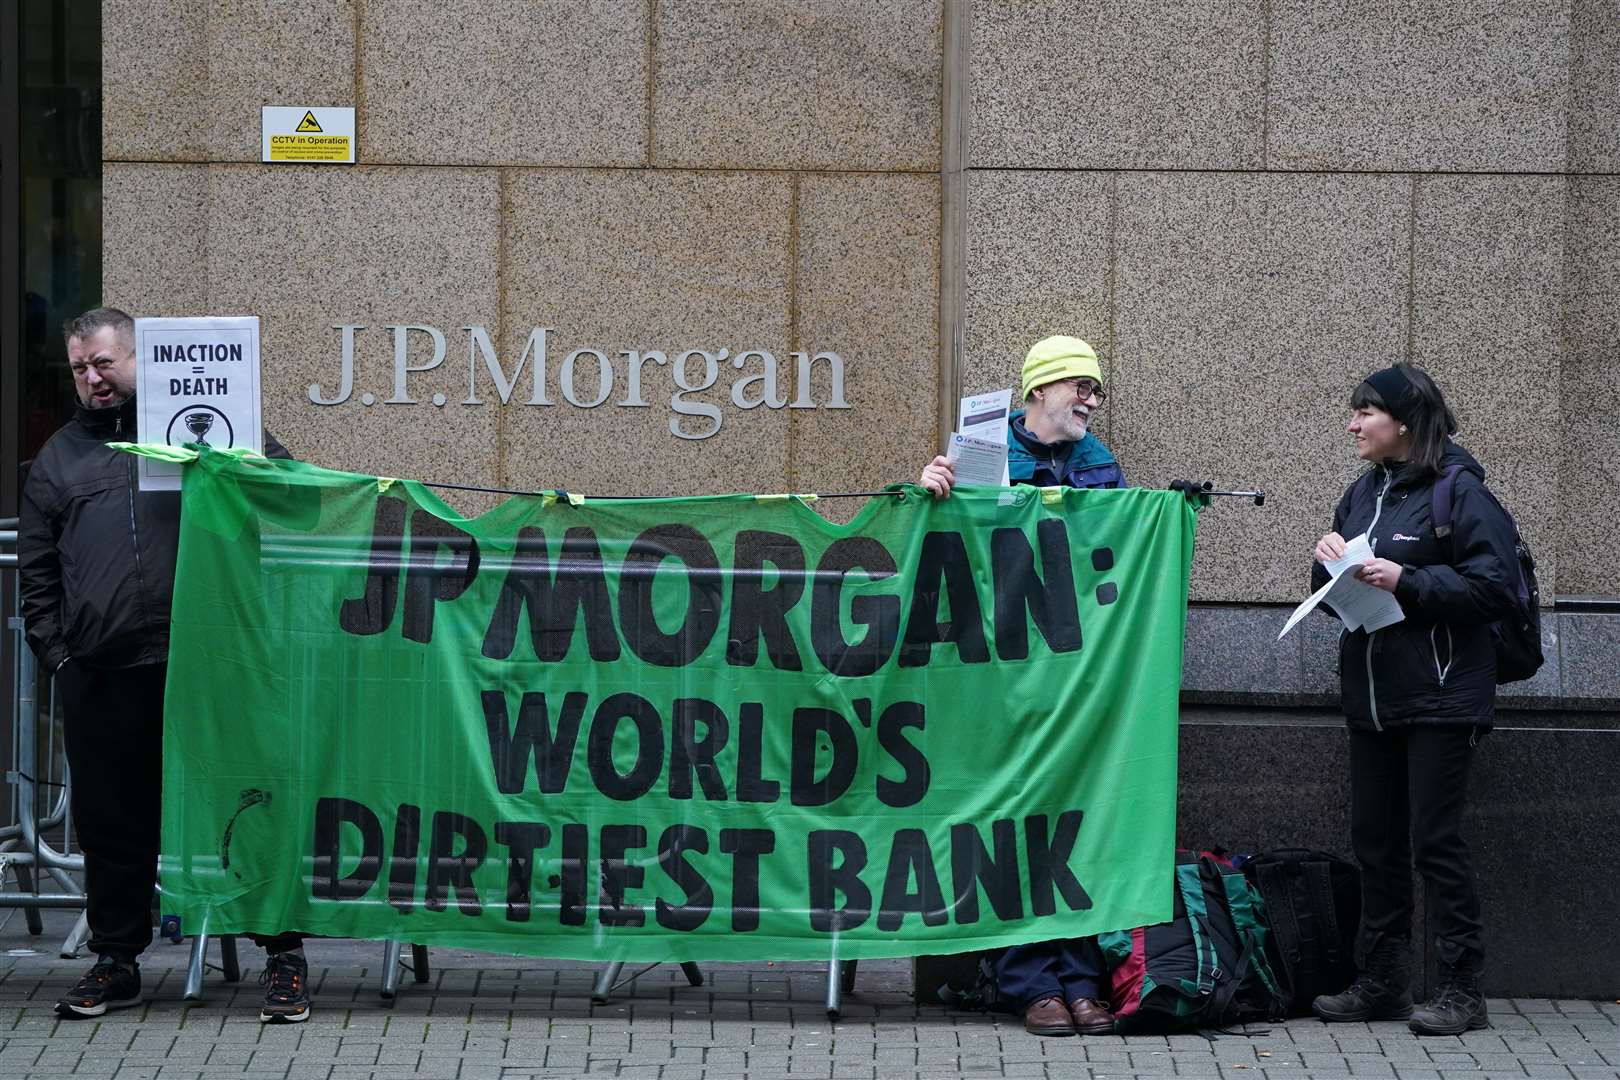 The activists accuse the bank of funding climate change (Andrew Milligan/PA)